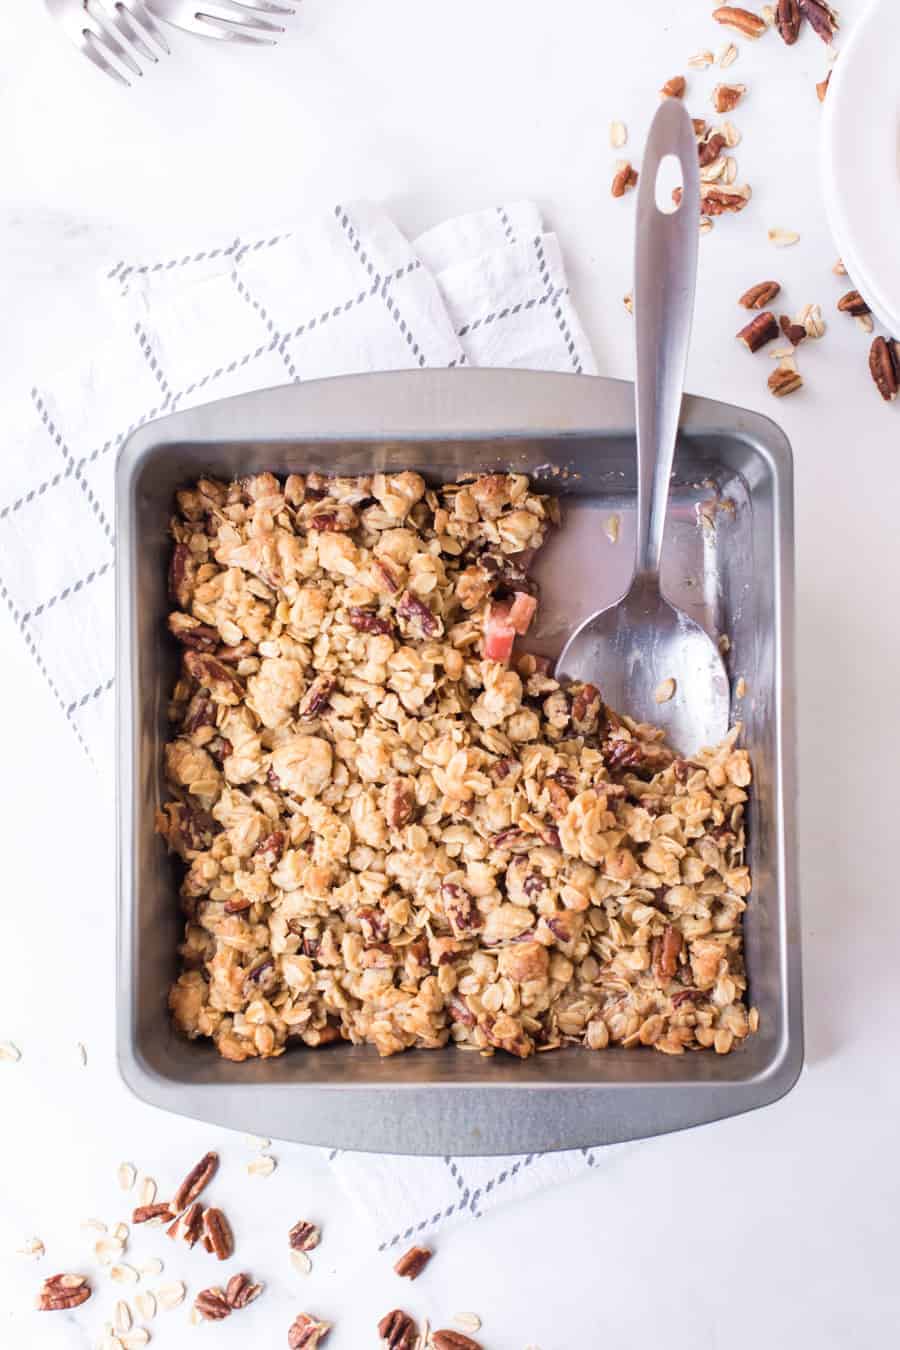 rhubarb crisp in baking pan with serving spoon on white towel and white countertop with pecans